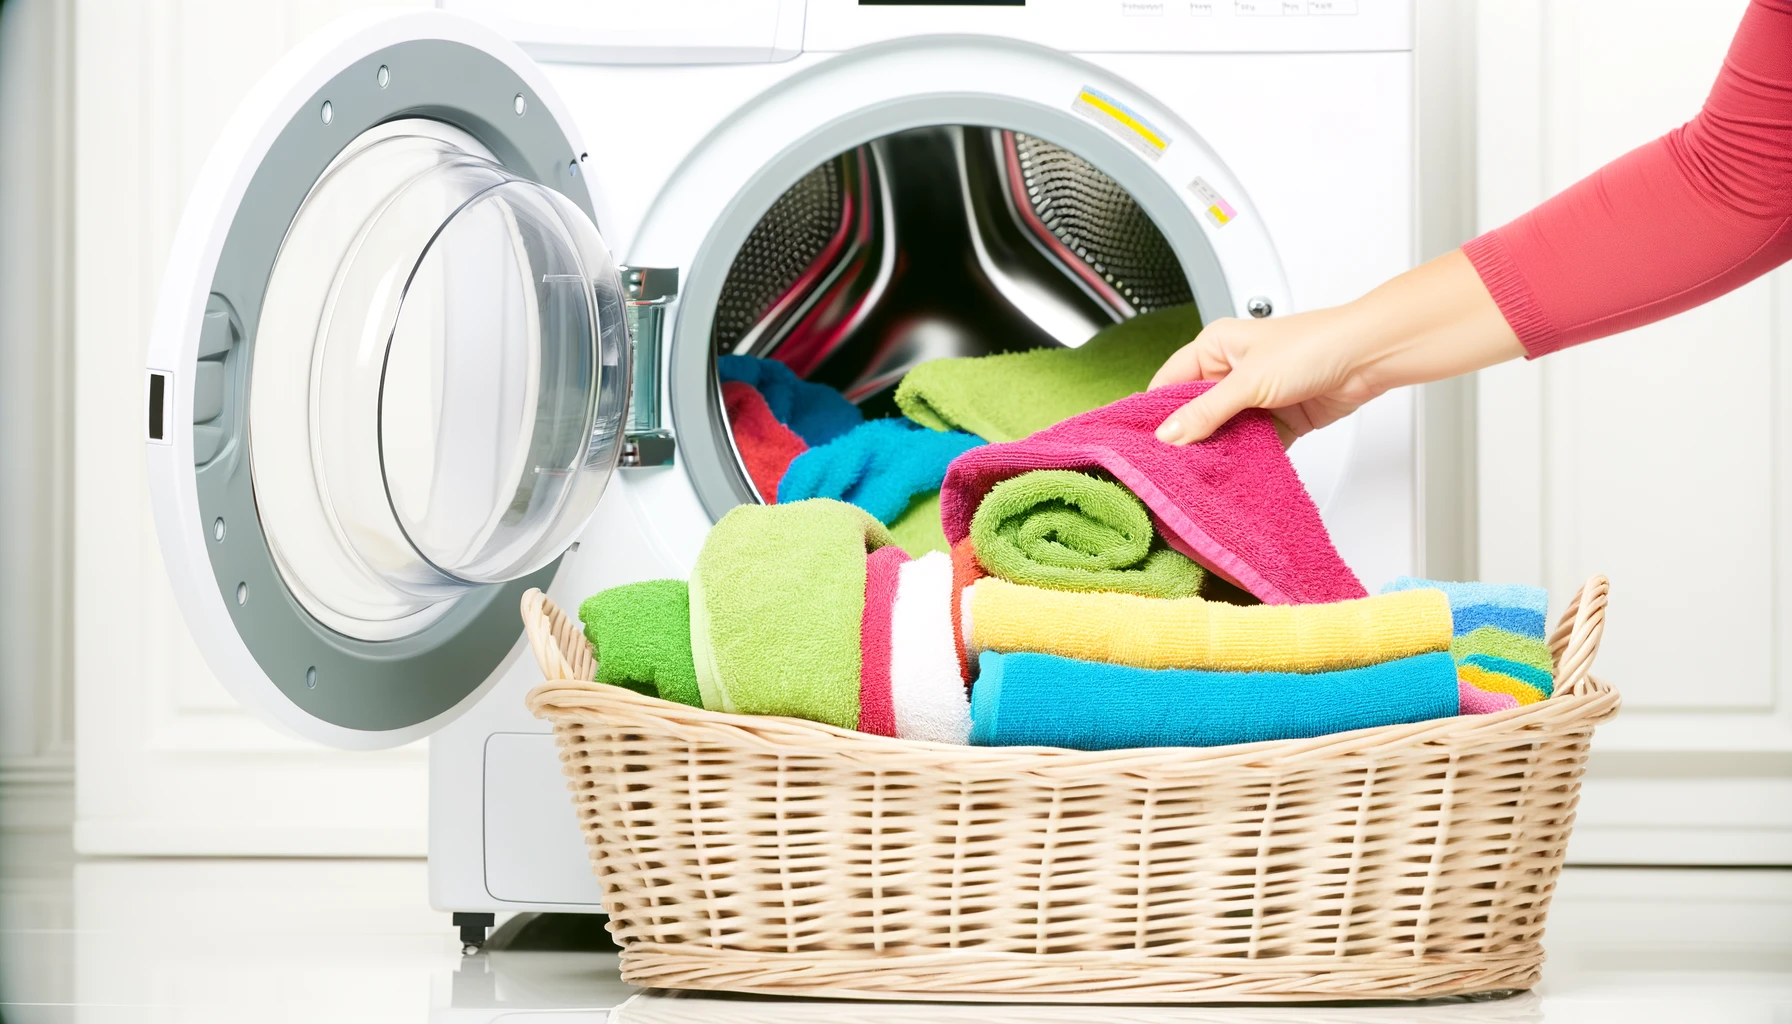 a colorful towel into a front-loading washing machine beside a wicker basket full of mixed laundry.